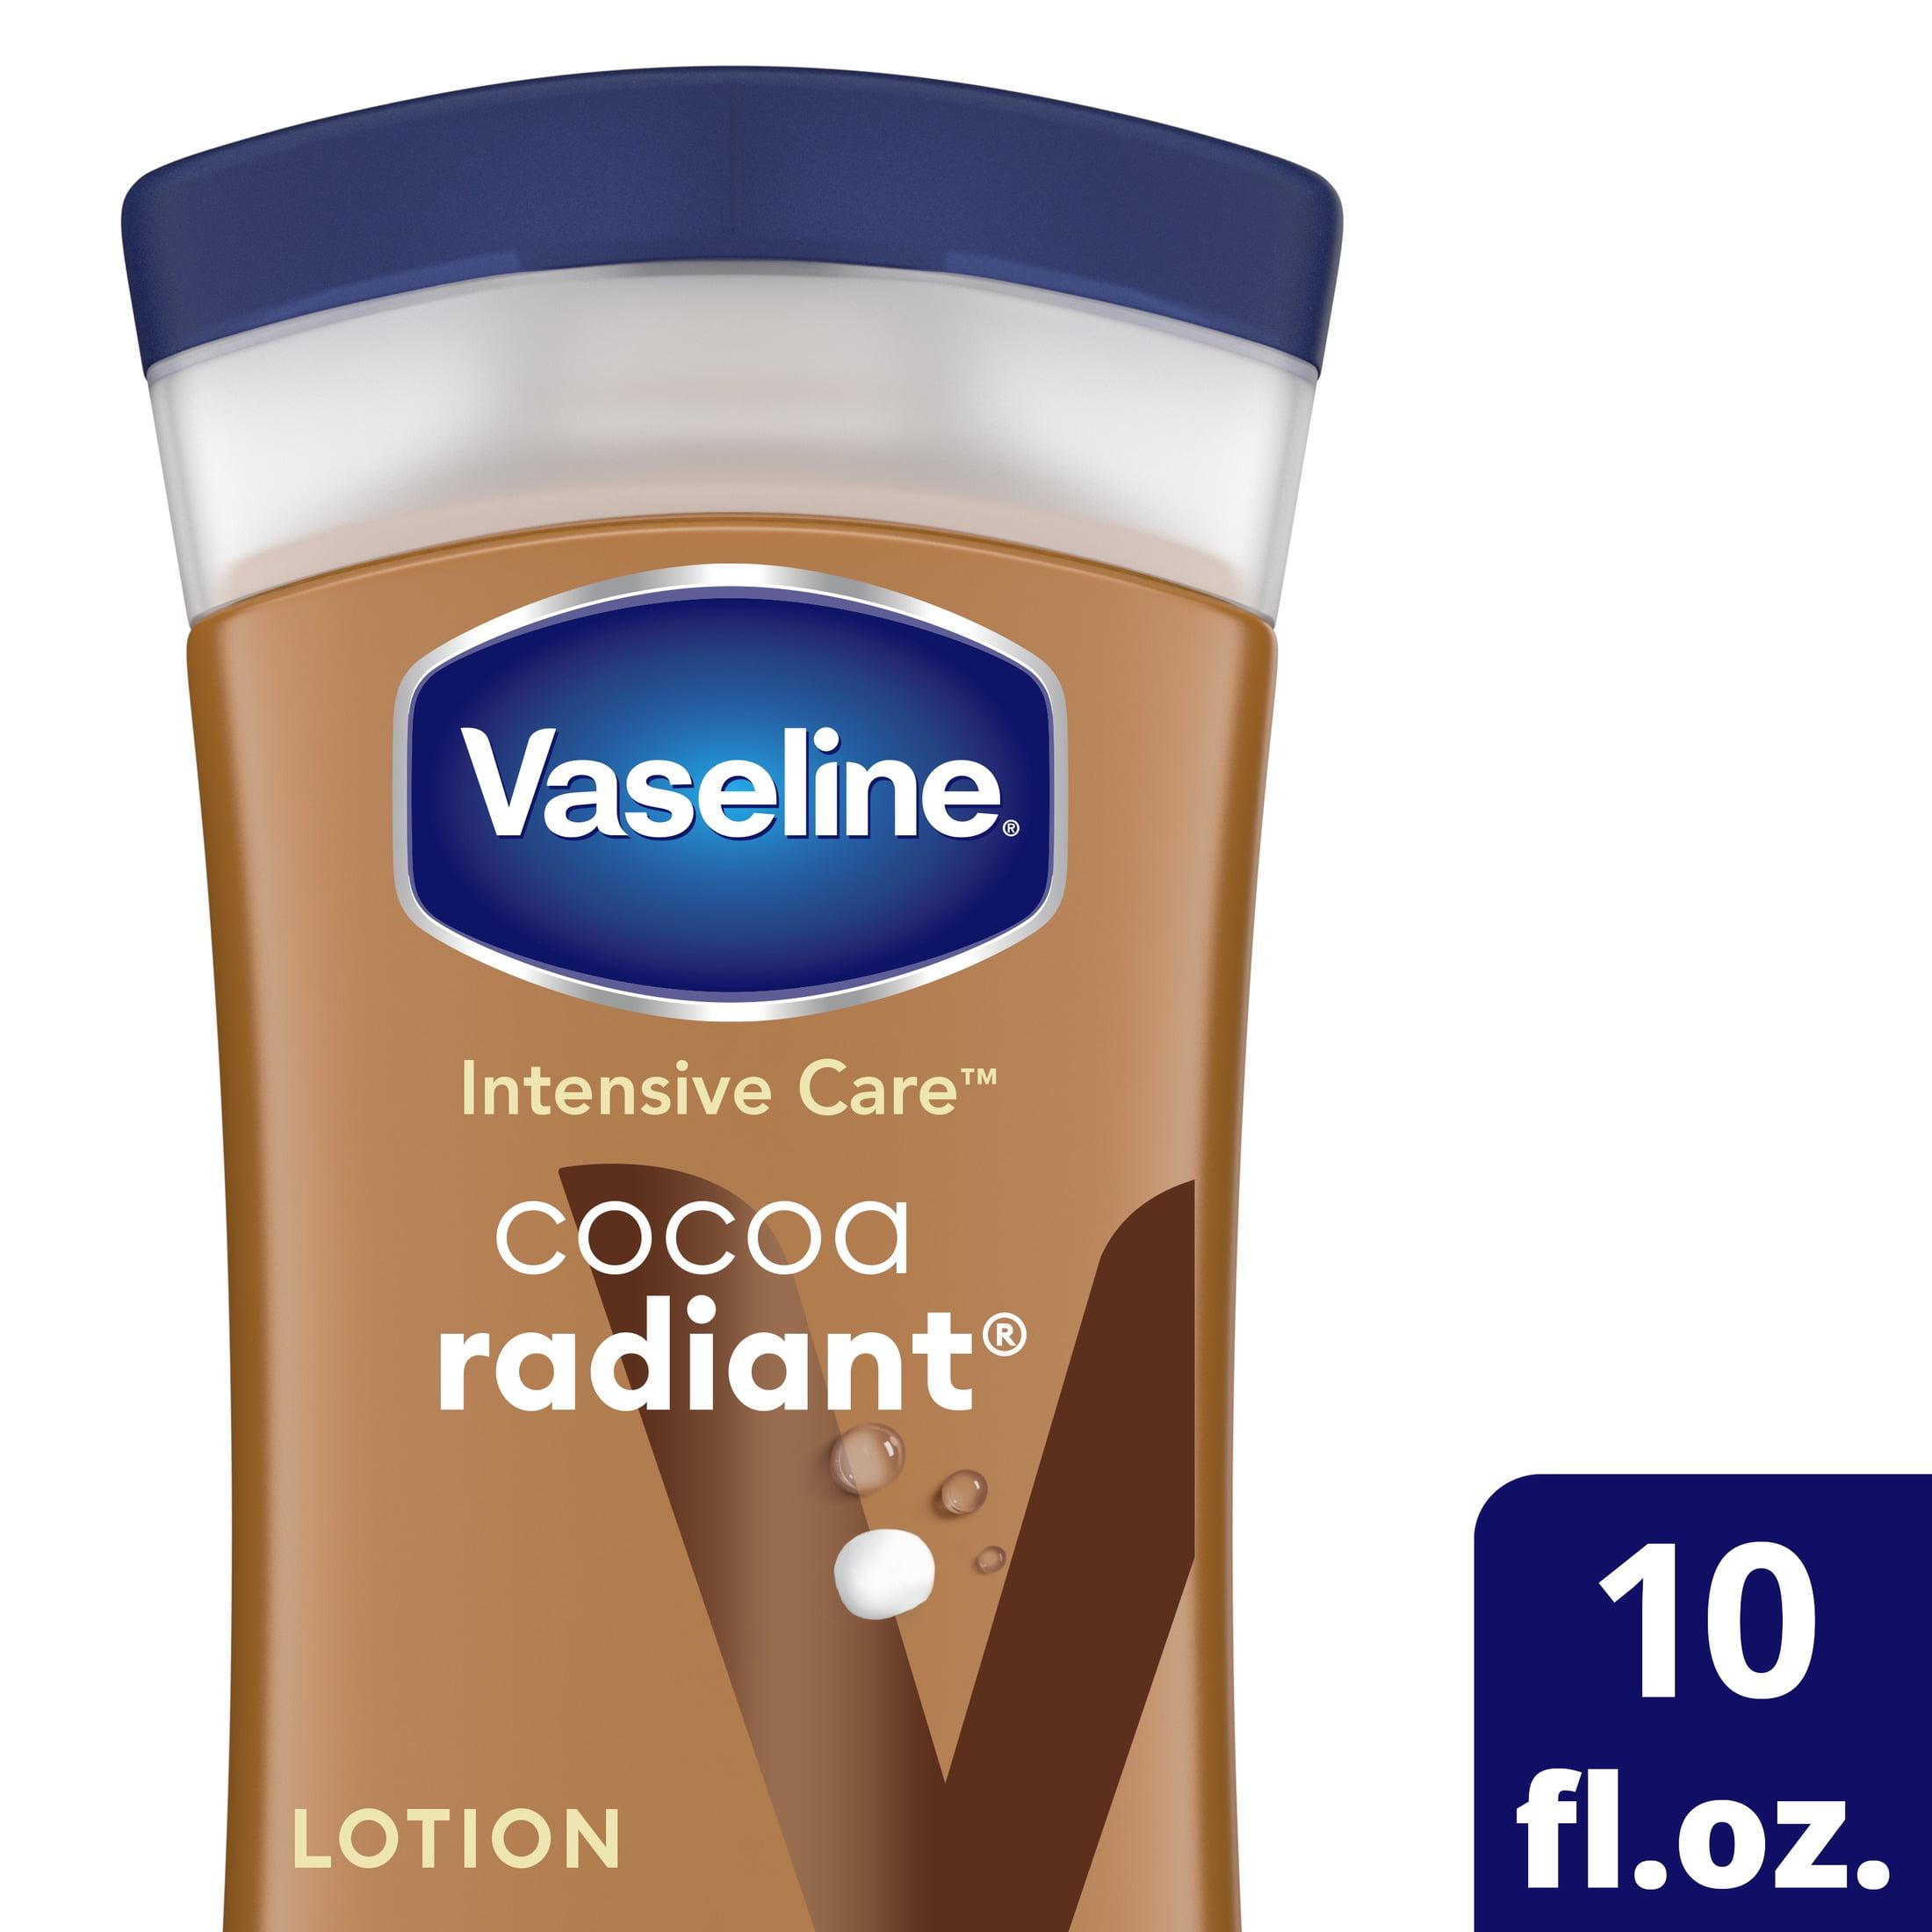 Vaseline Intensive Care Radiant Non Greasy Body Lotion for Dry Skin, Cocoa, 10 fl oz - image 7 of 12